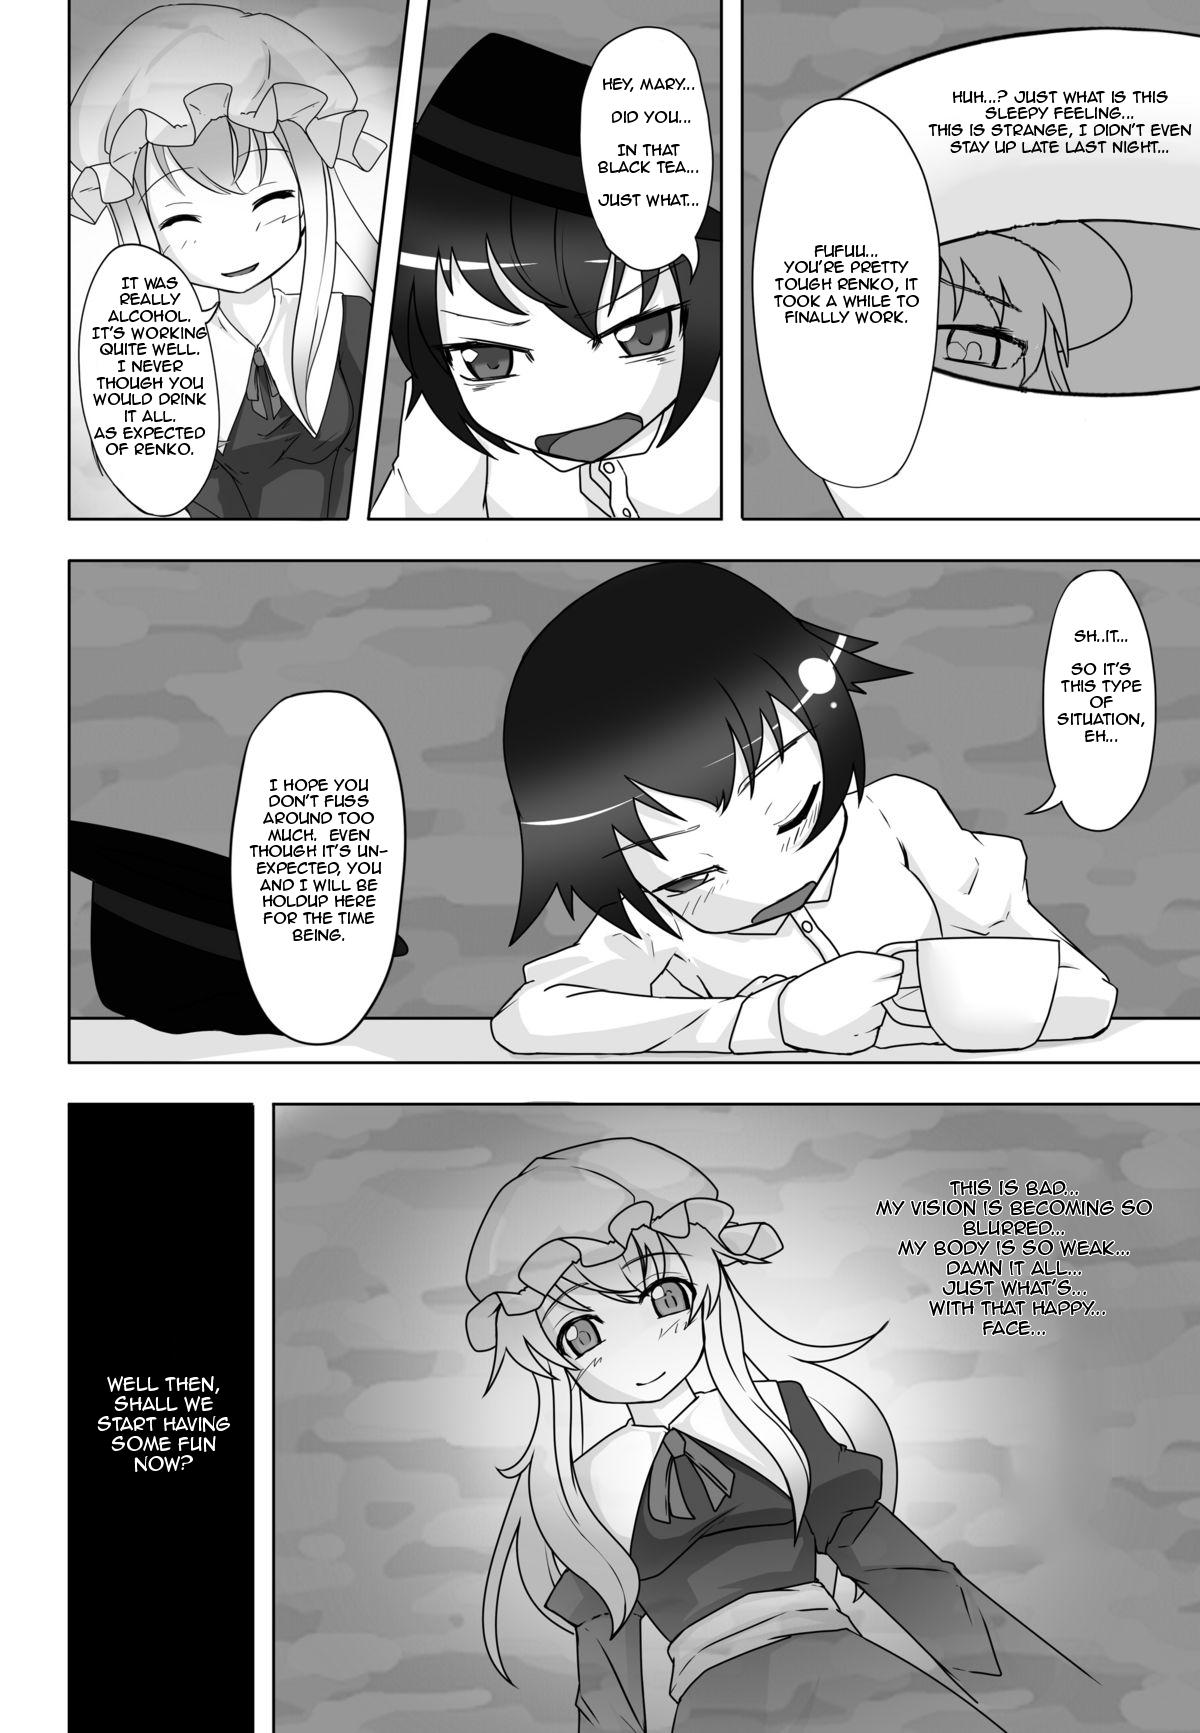 Scissoring 2nd Skin Vol. 1 - Touhou project Gay Black - Page 3